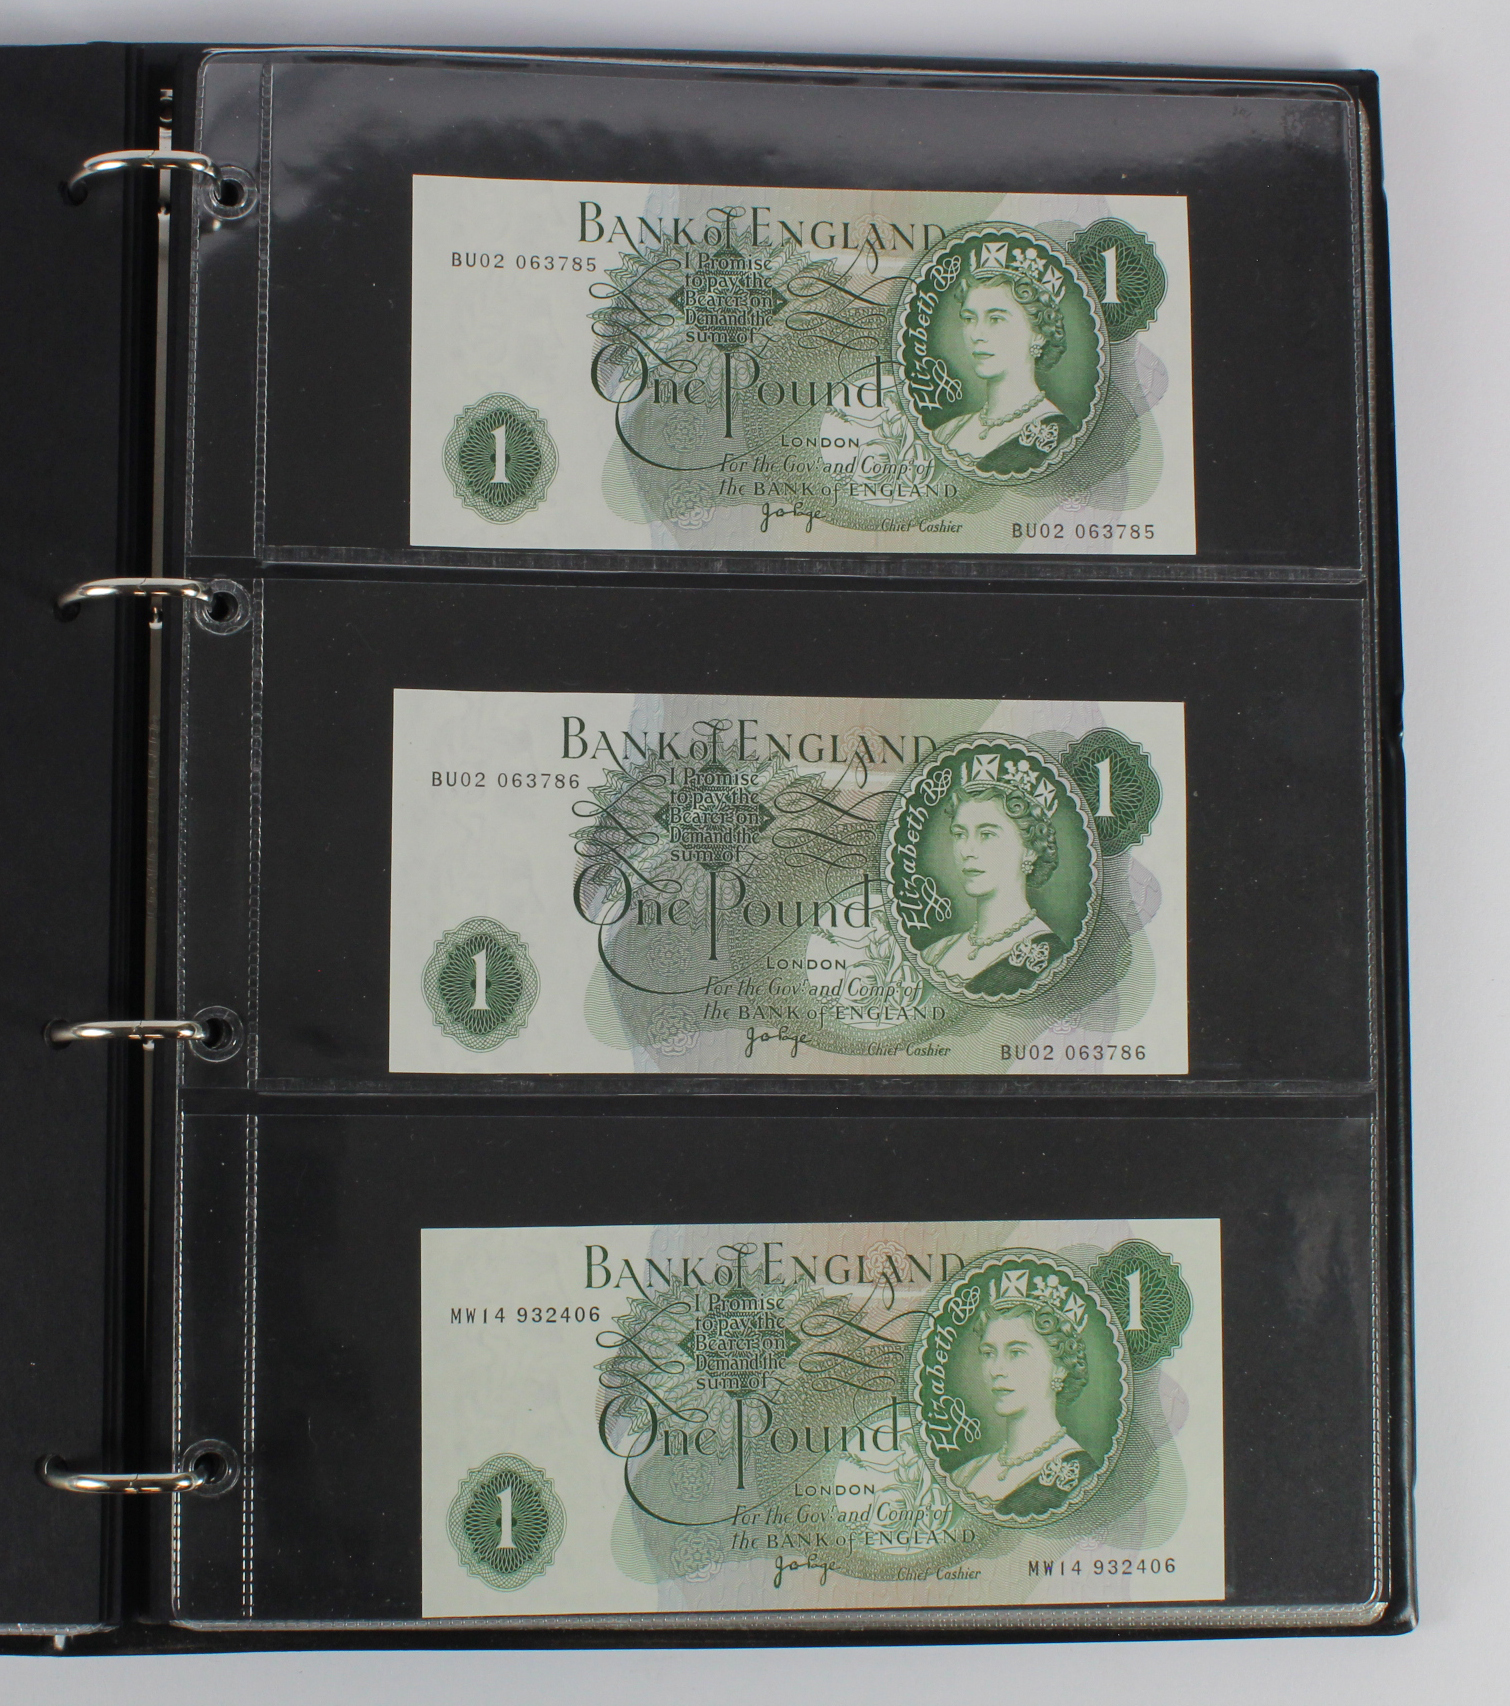 Bank of England (47), a good range of notes in Hendon album with signatures from Catterns, Peppiatt, - Image 11 of 18